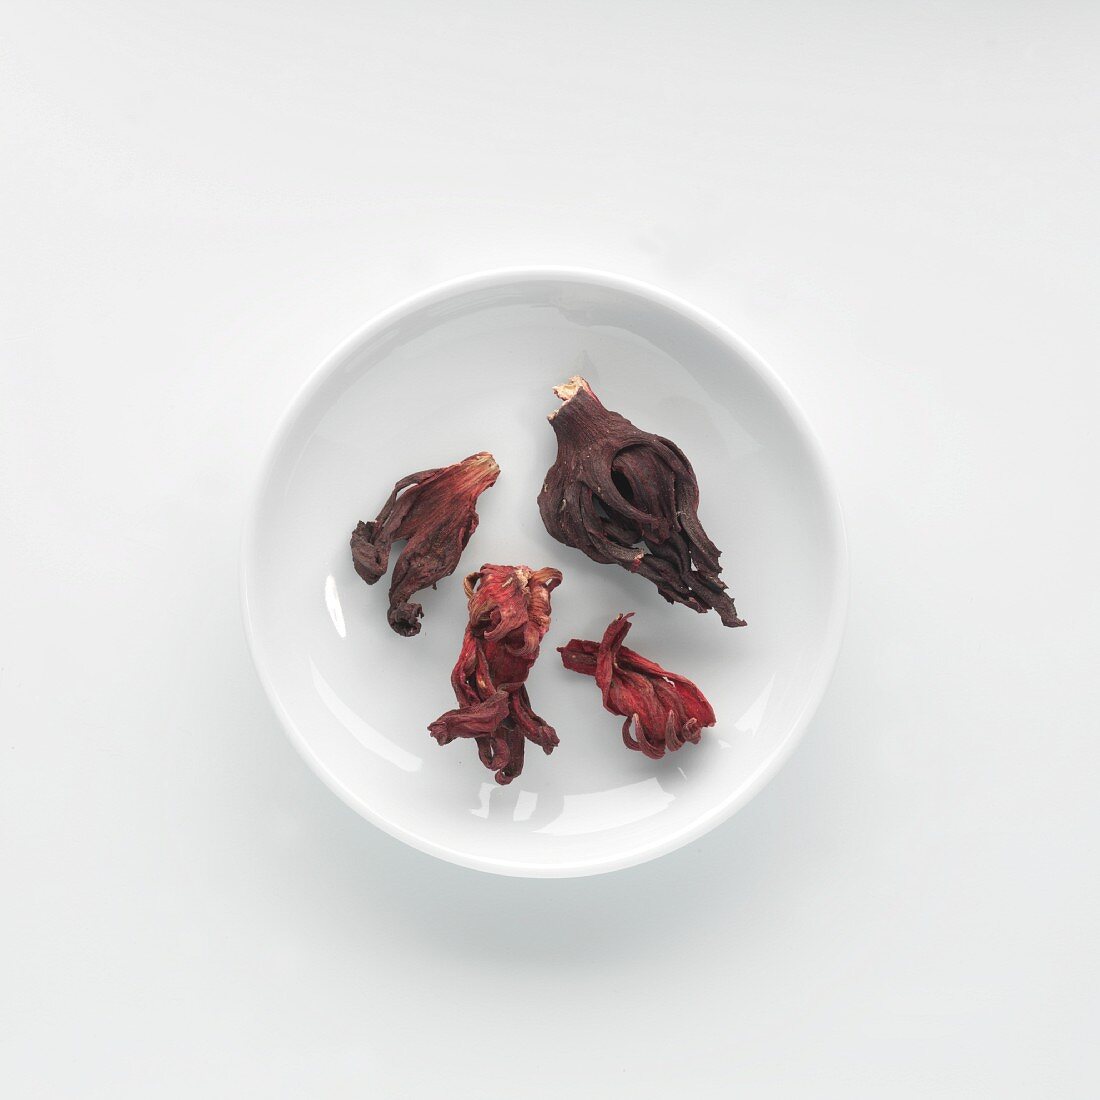 Dried hibiscus flowers and mallows on a plate